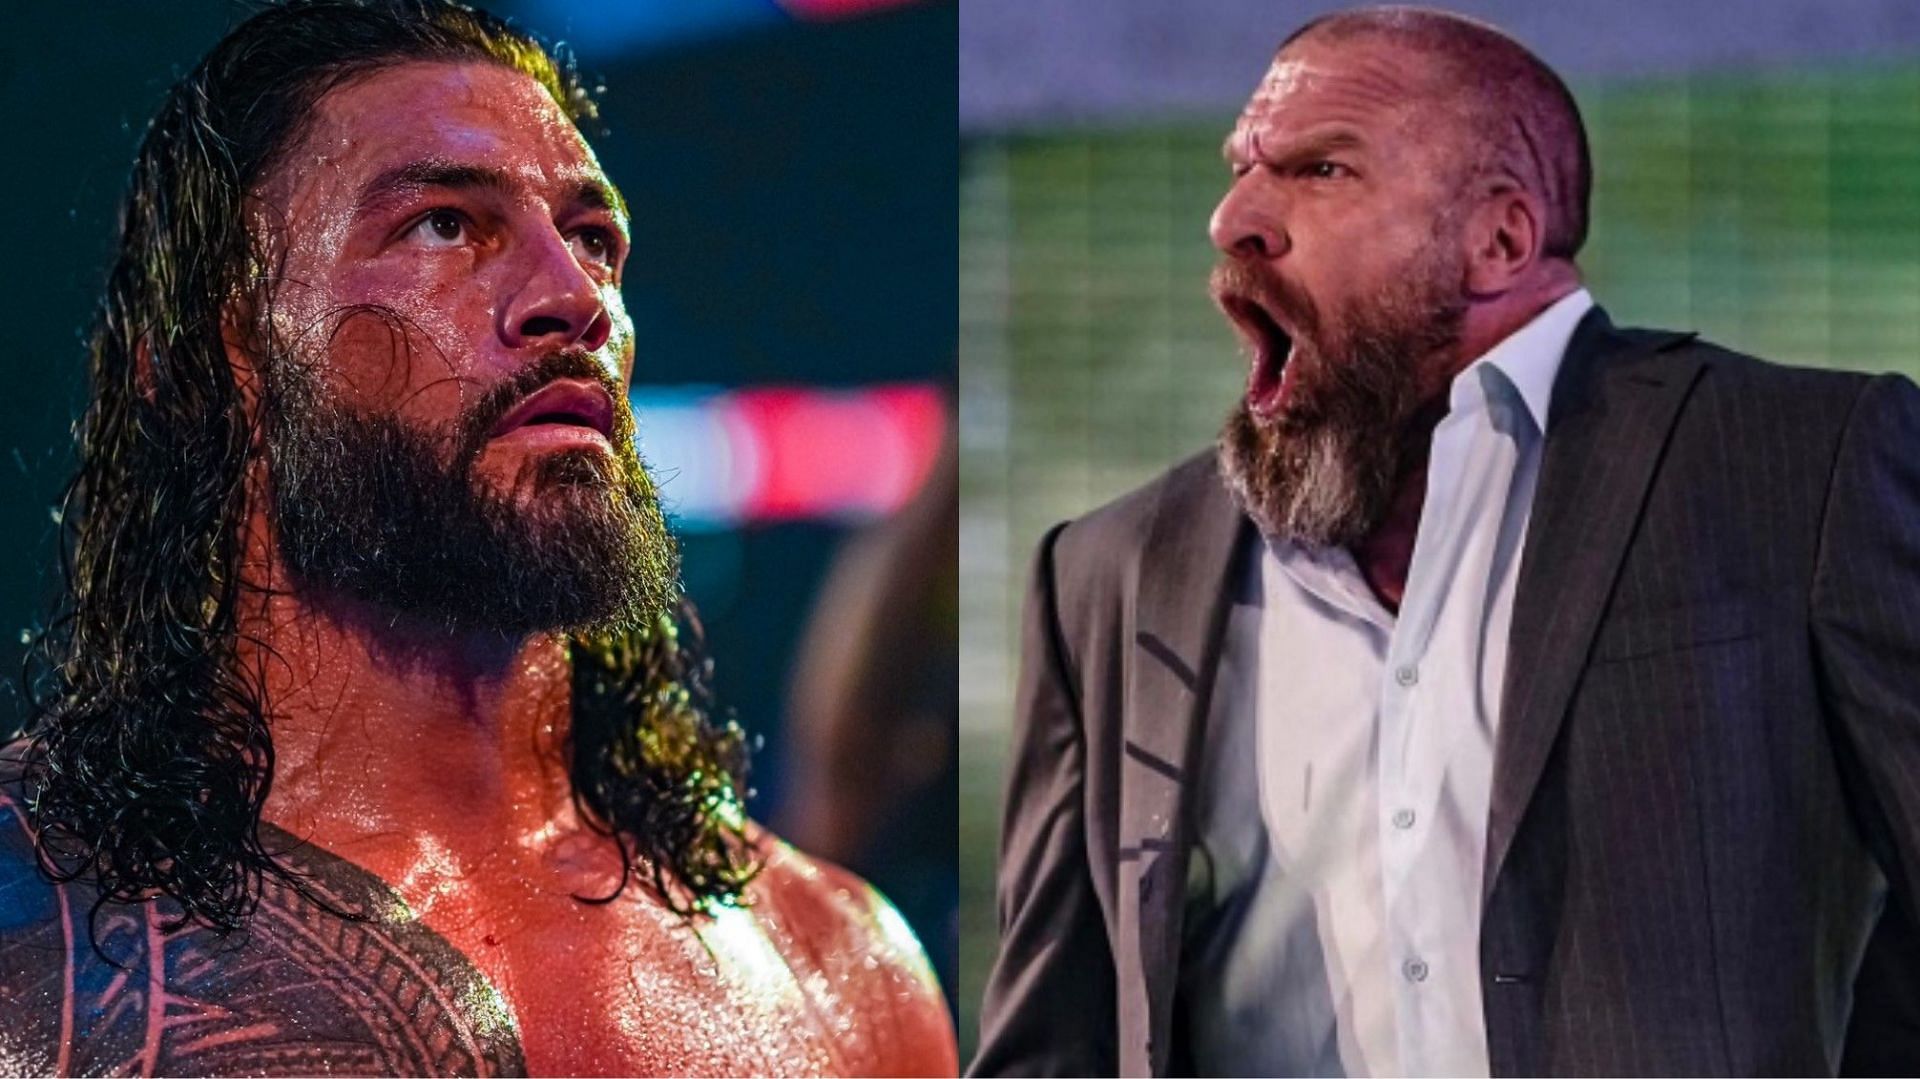 Roman Reigns (left) and Triple H (right)